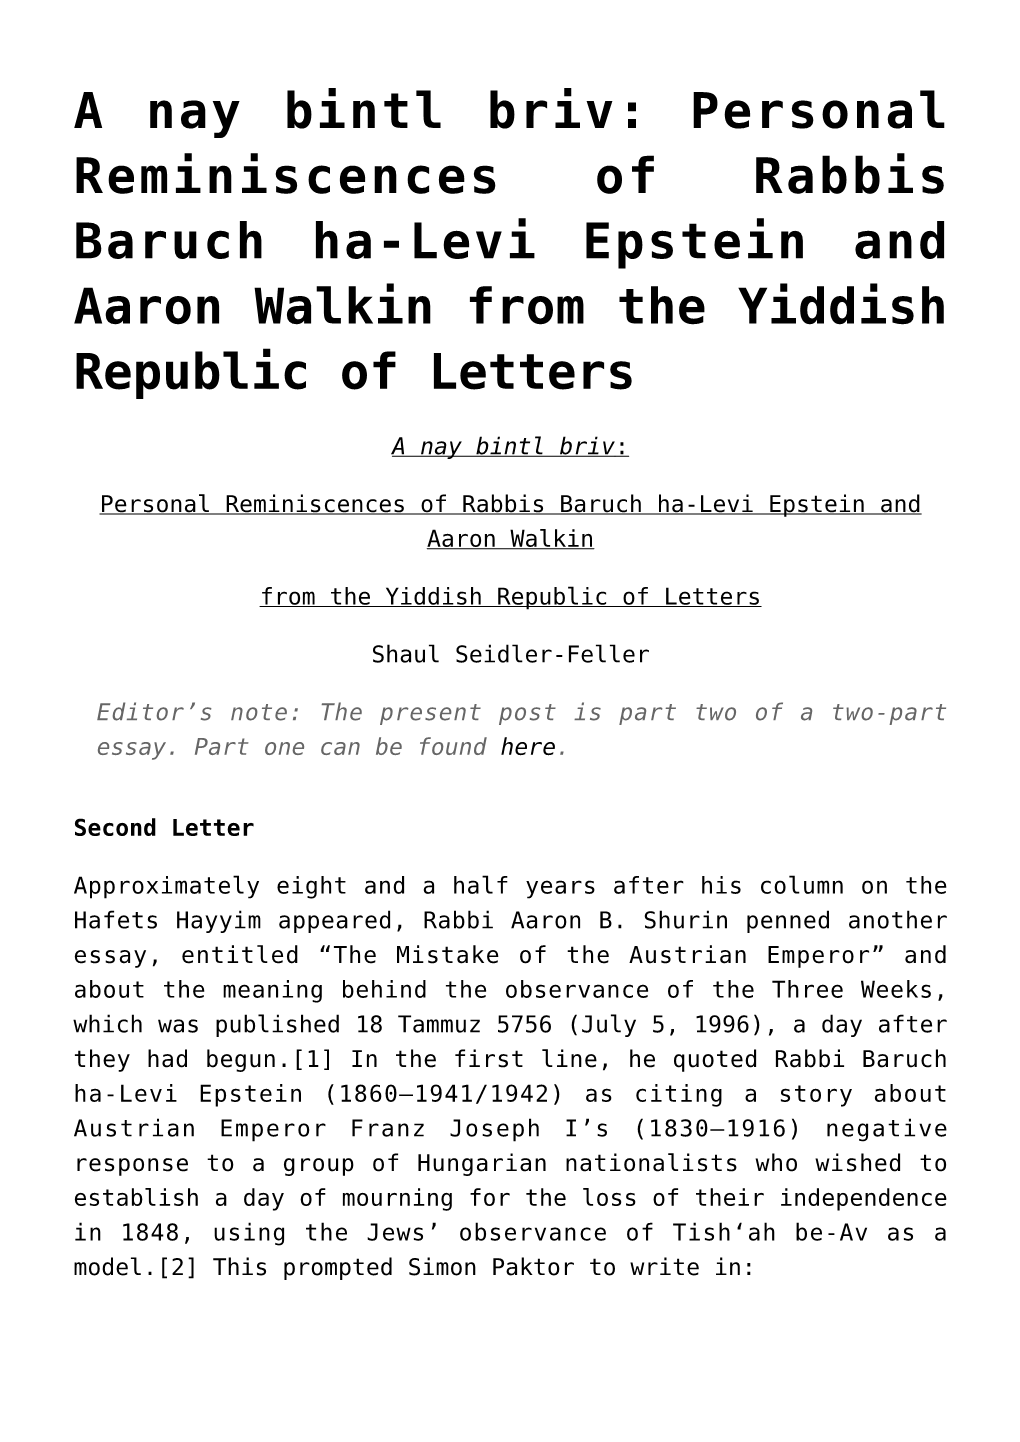 Personal Reminiscences of Rabbis Baruch Ha-Levi Epstein and Aaron Walkin from the Yiddish Republic of Letters